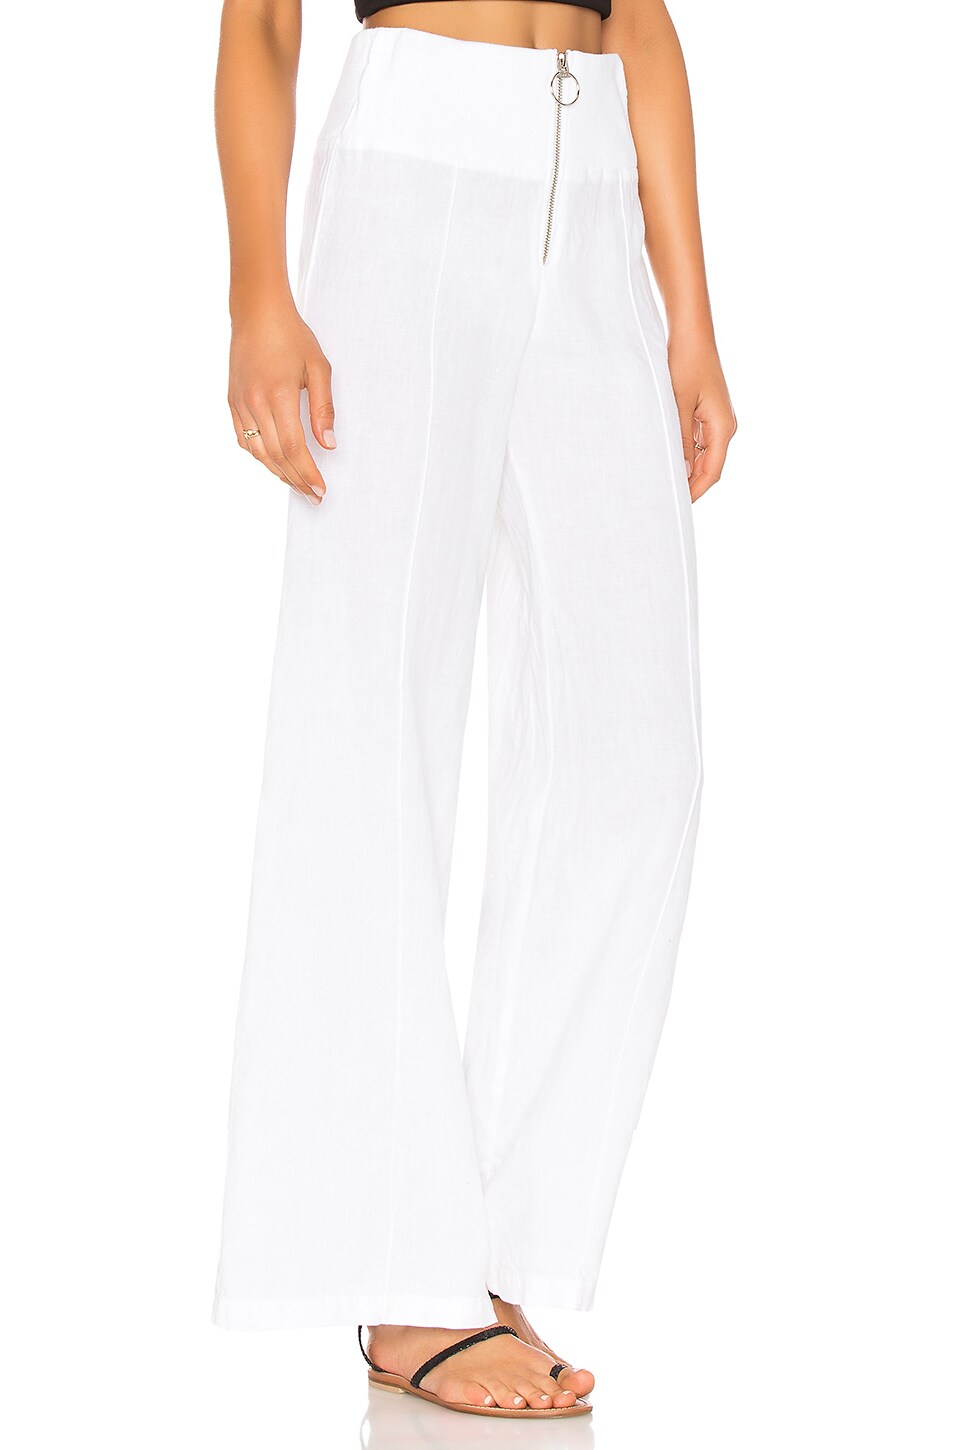 Enza Costa French Linen Pintuck Wide Leg Pant in White | REVOLVE